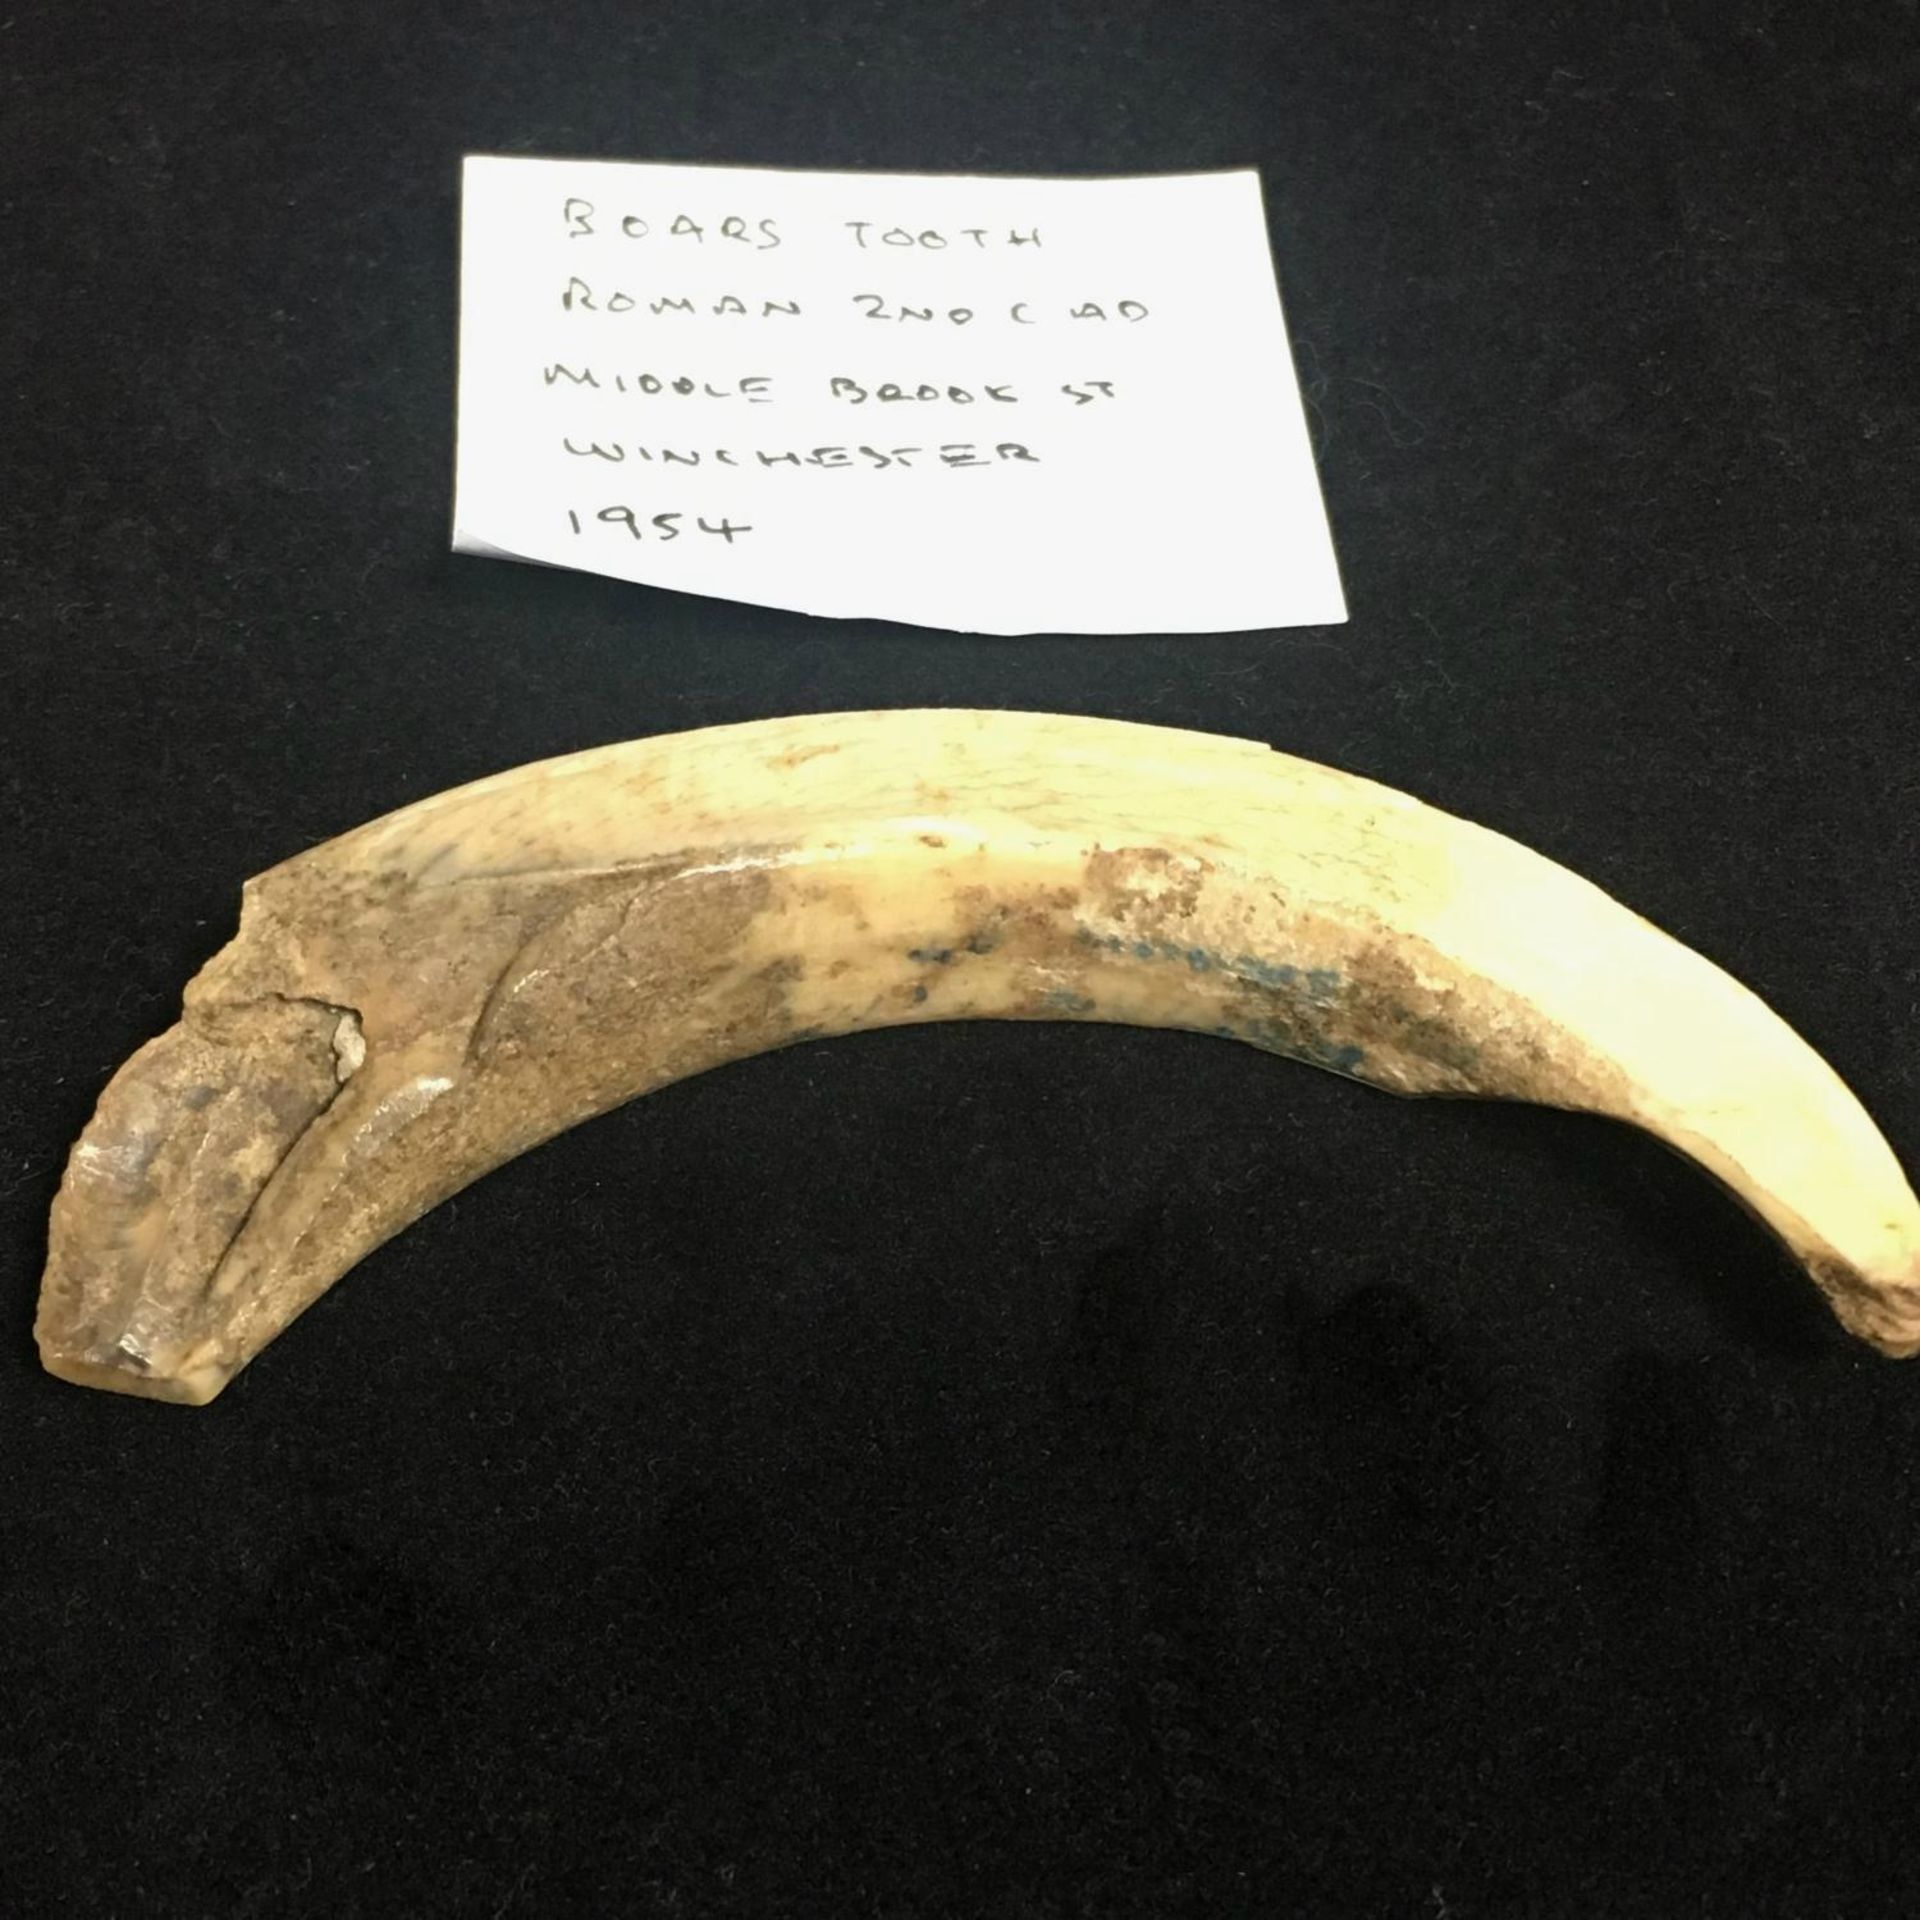 2ND or 3RD CENTURY ROMAN BOARS TUSK TOOTH. Uncovered at Roman Levels in Middle Brooke Street, - Image 2 of 2